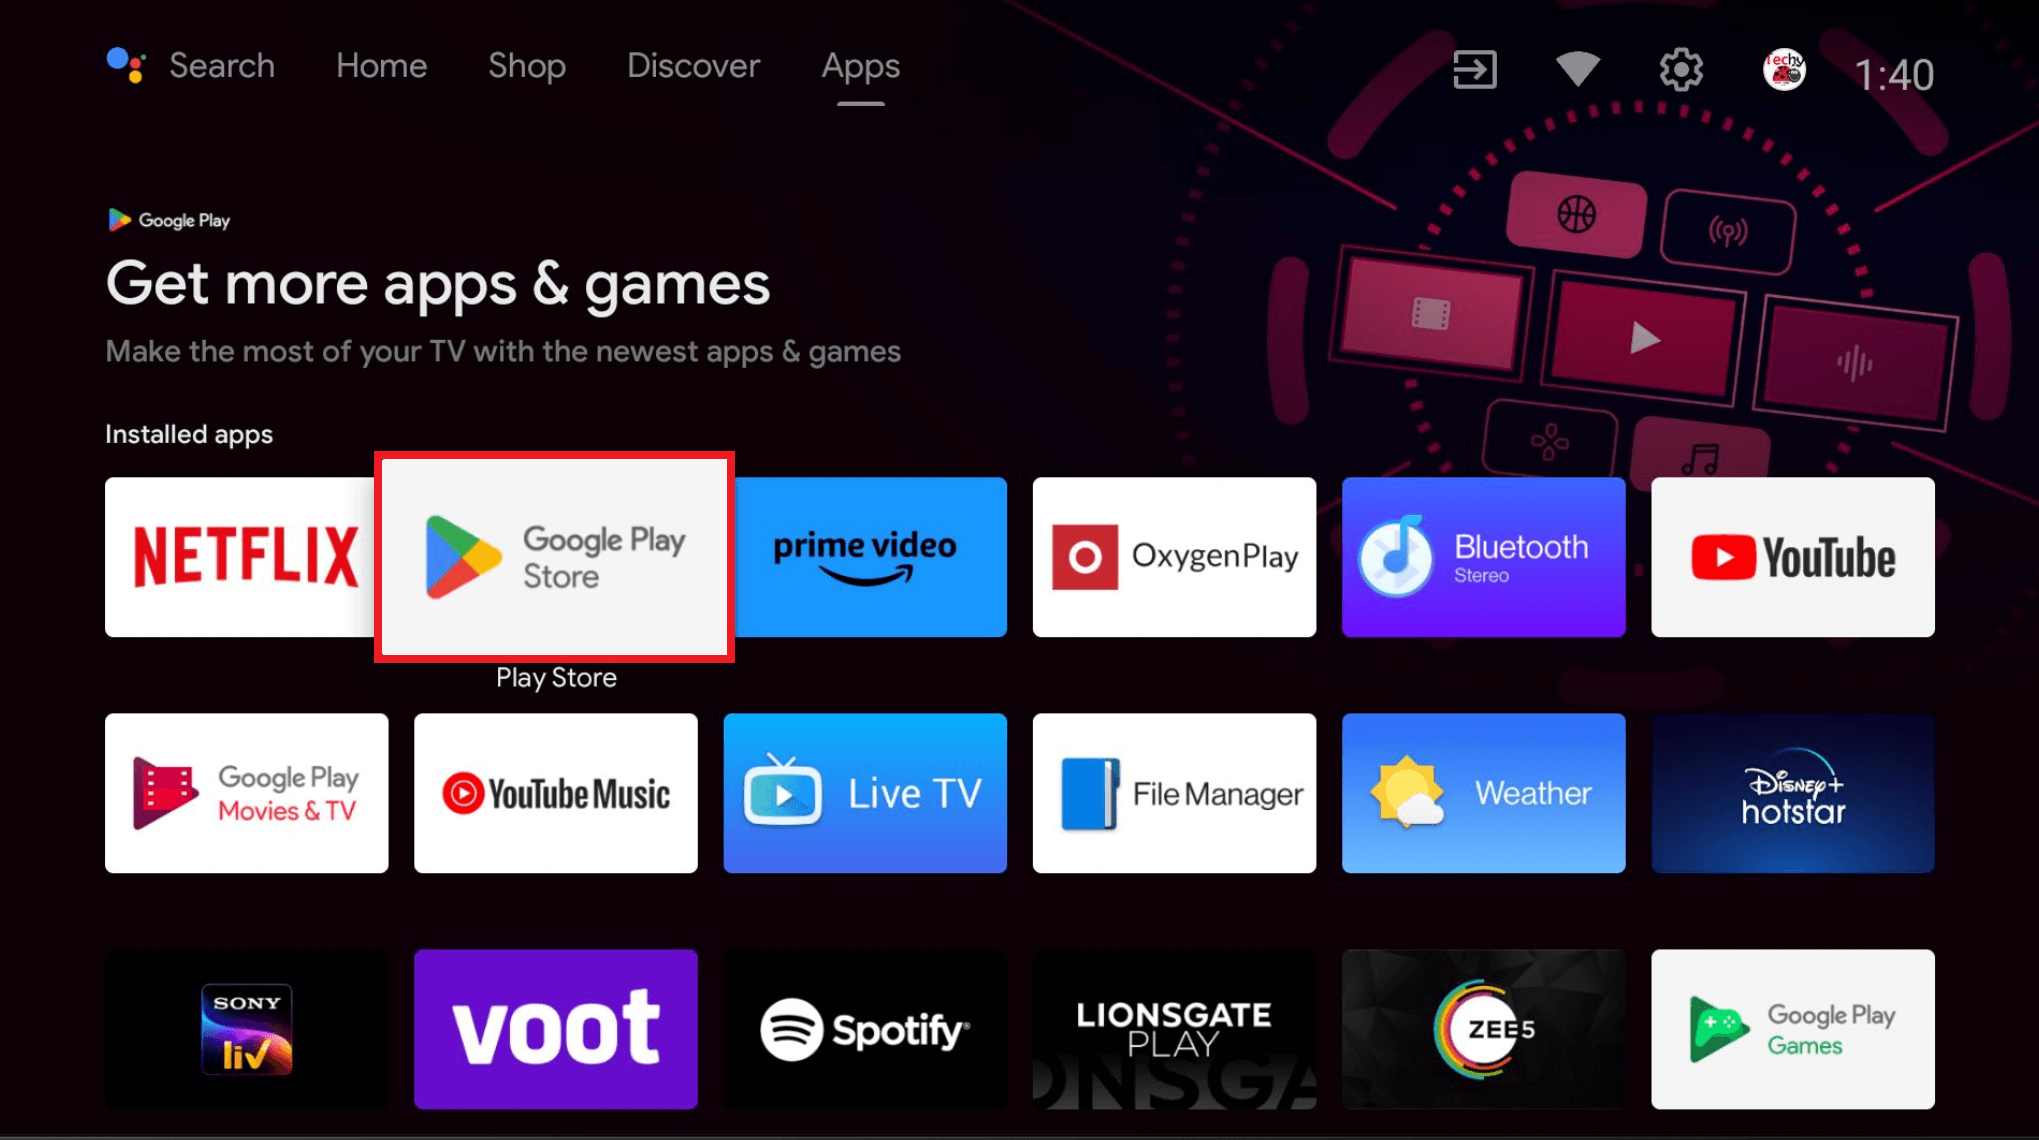 Open Play Store to download the IPTV app